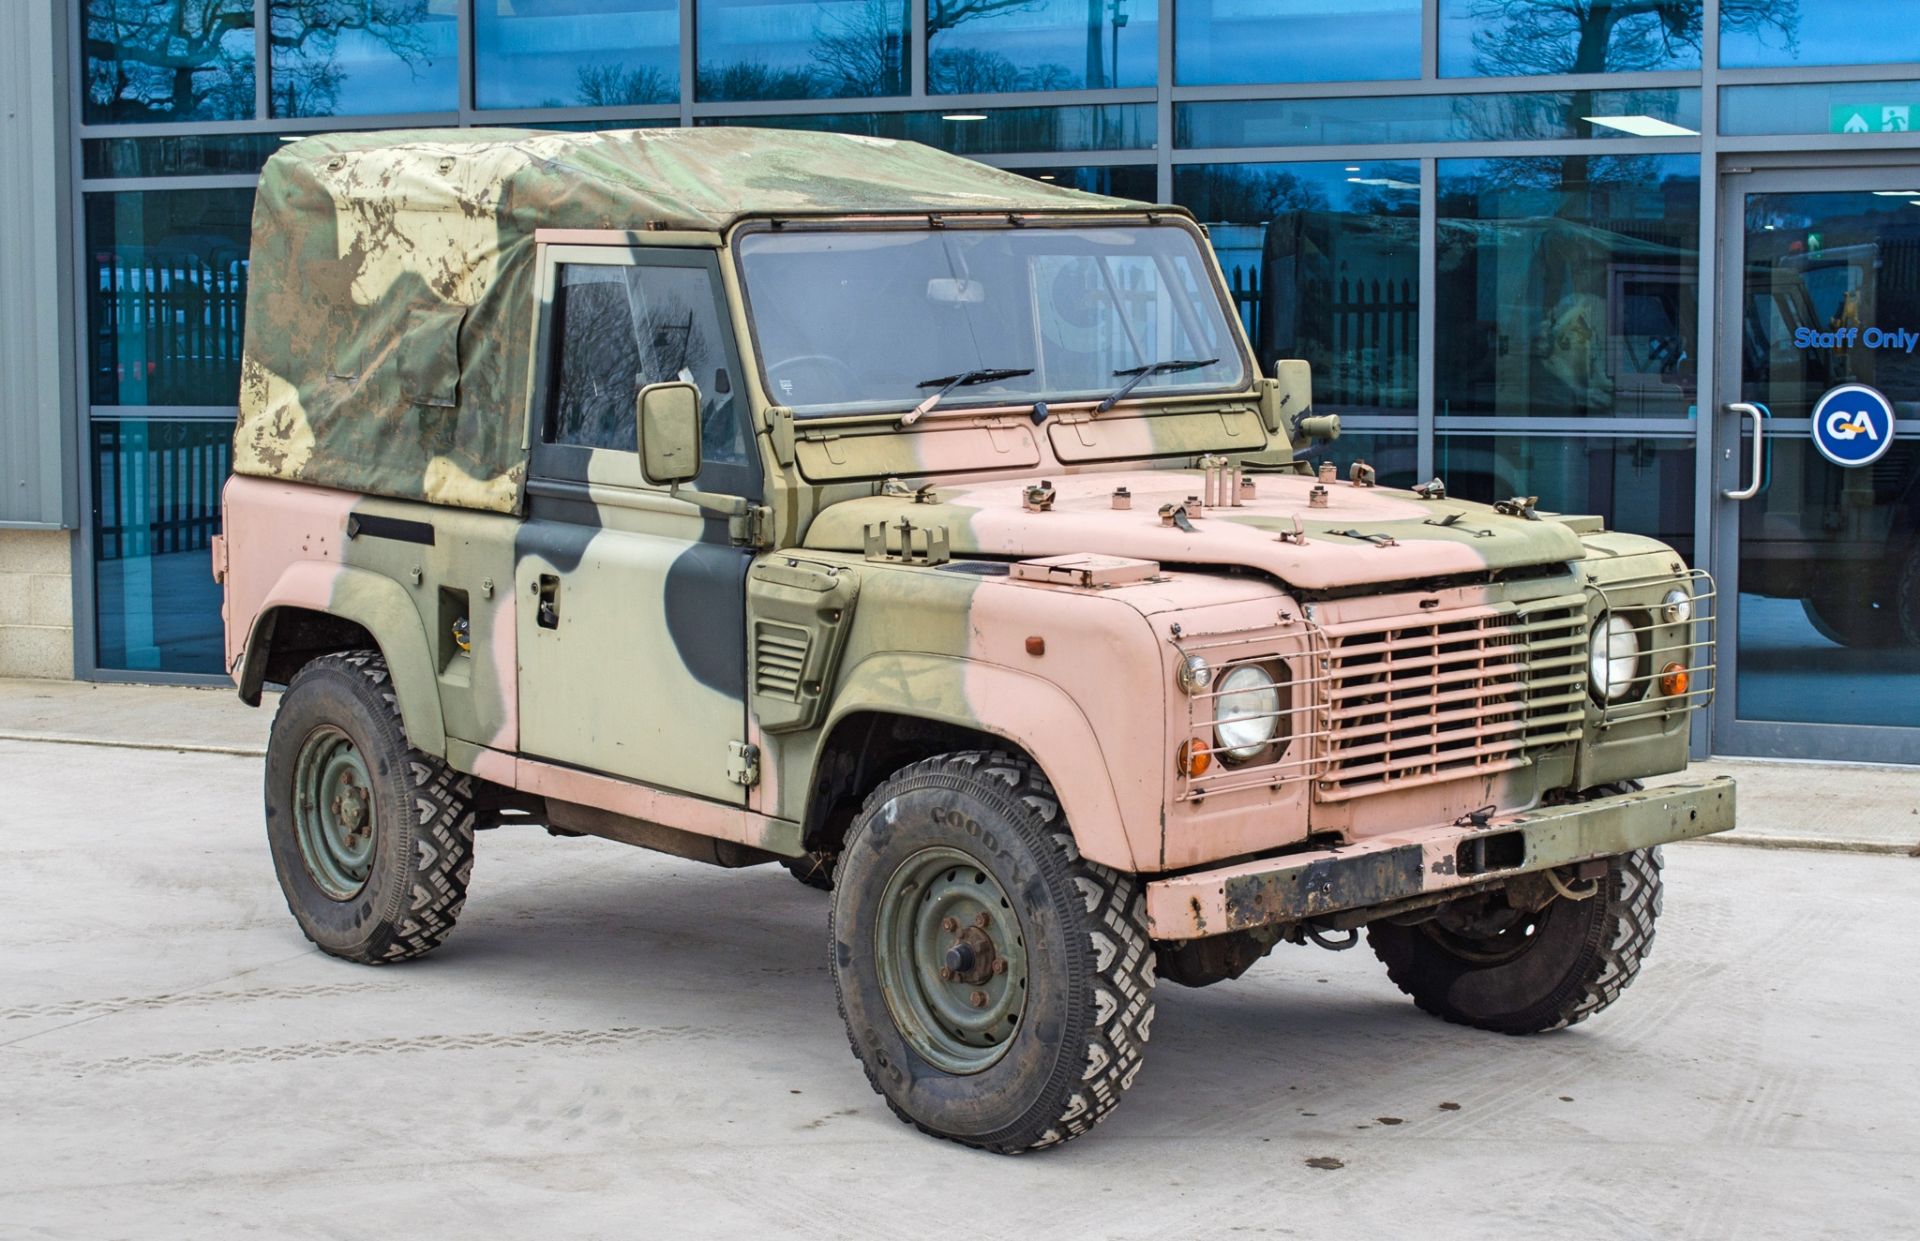 1997 Land Rover Defender 90 WOLF 2.5 litre 300TDI 4 wheel drive utility vehicle Ex MOD - Image 2 of 45